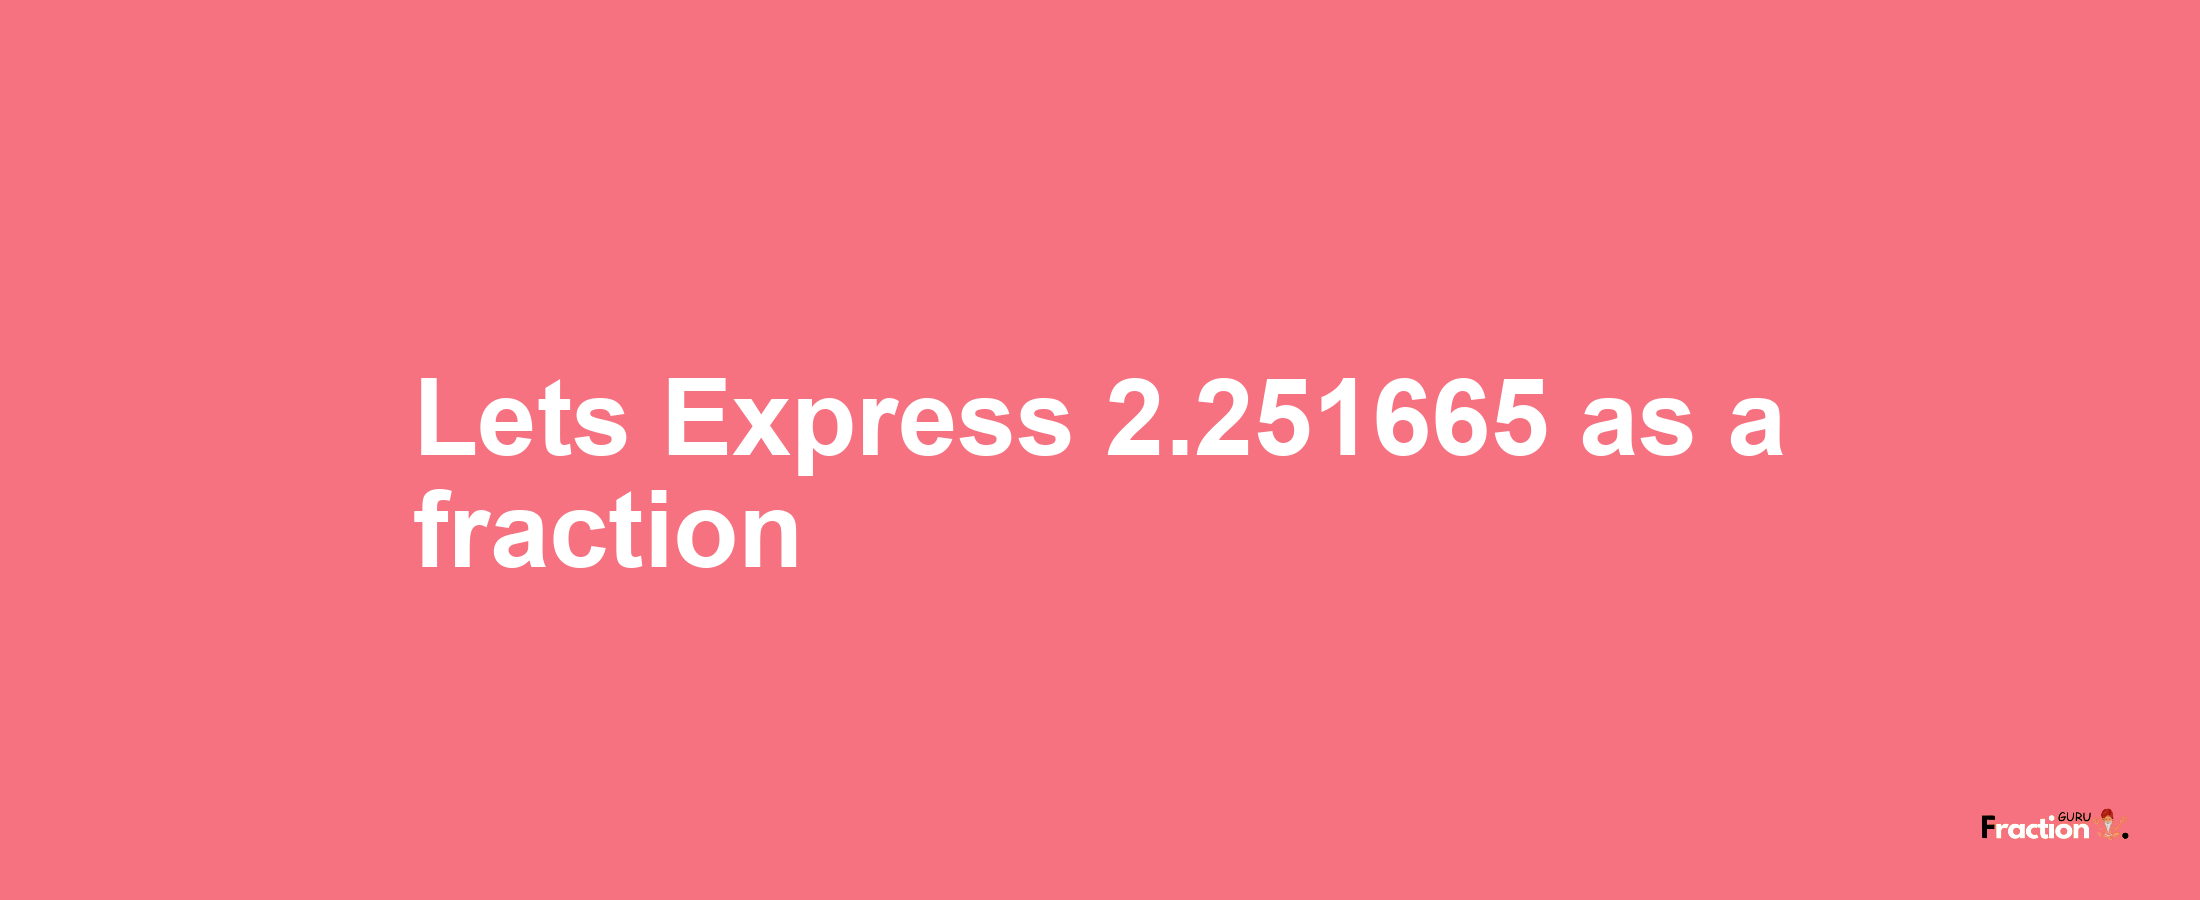 Lets Express 2.251665 as afraction